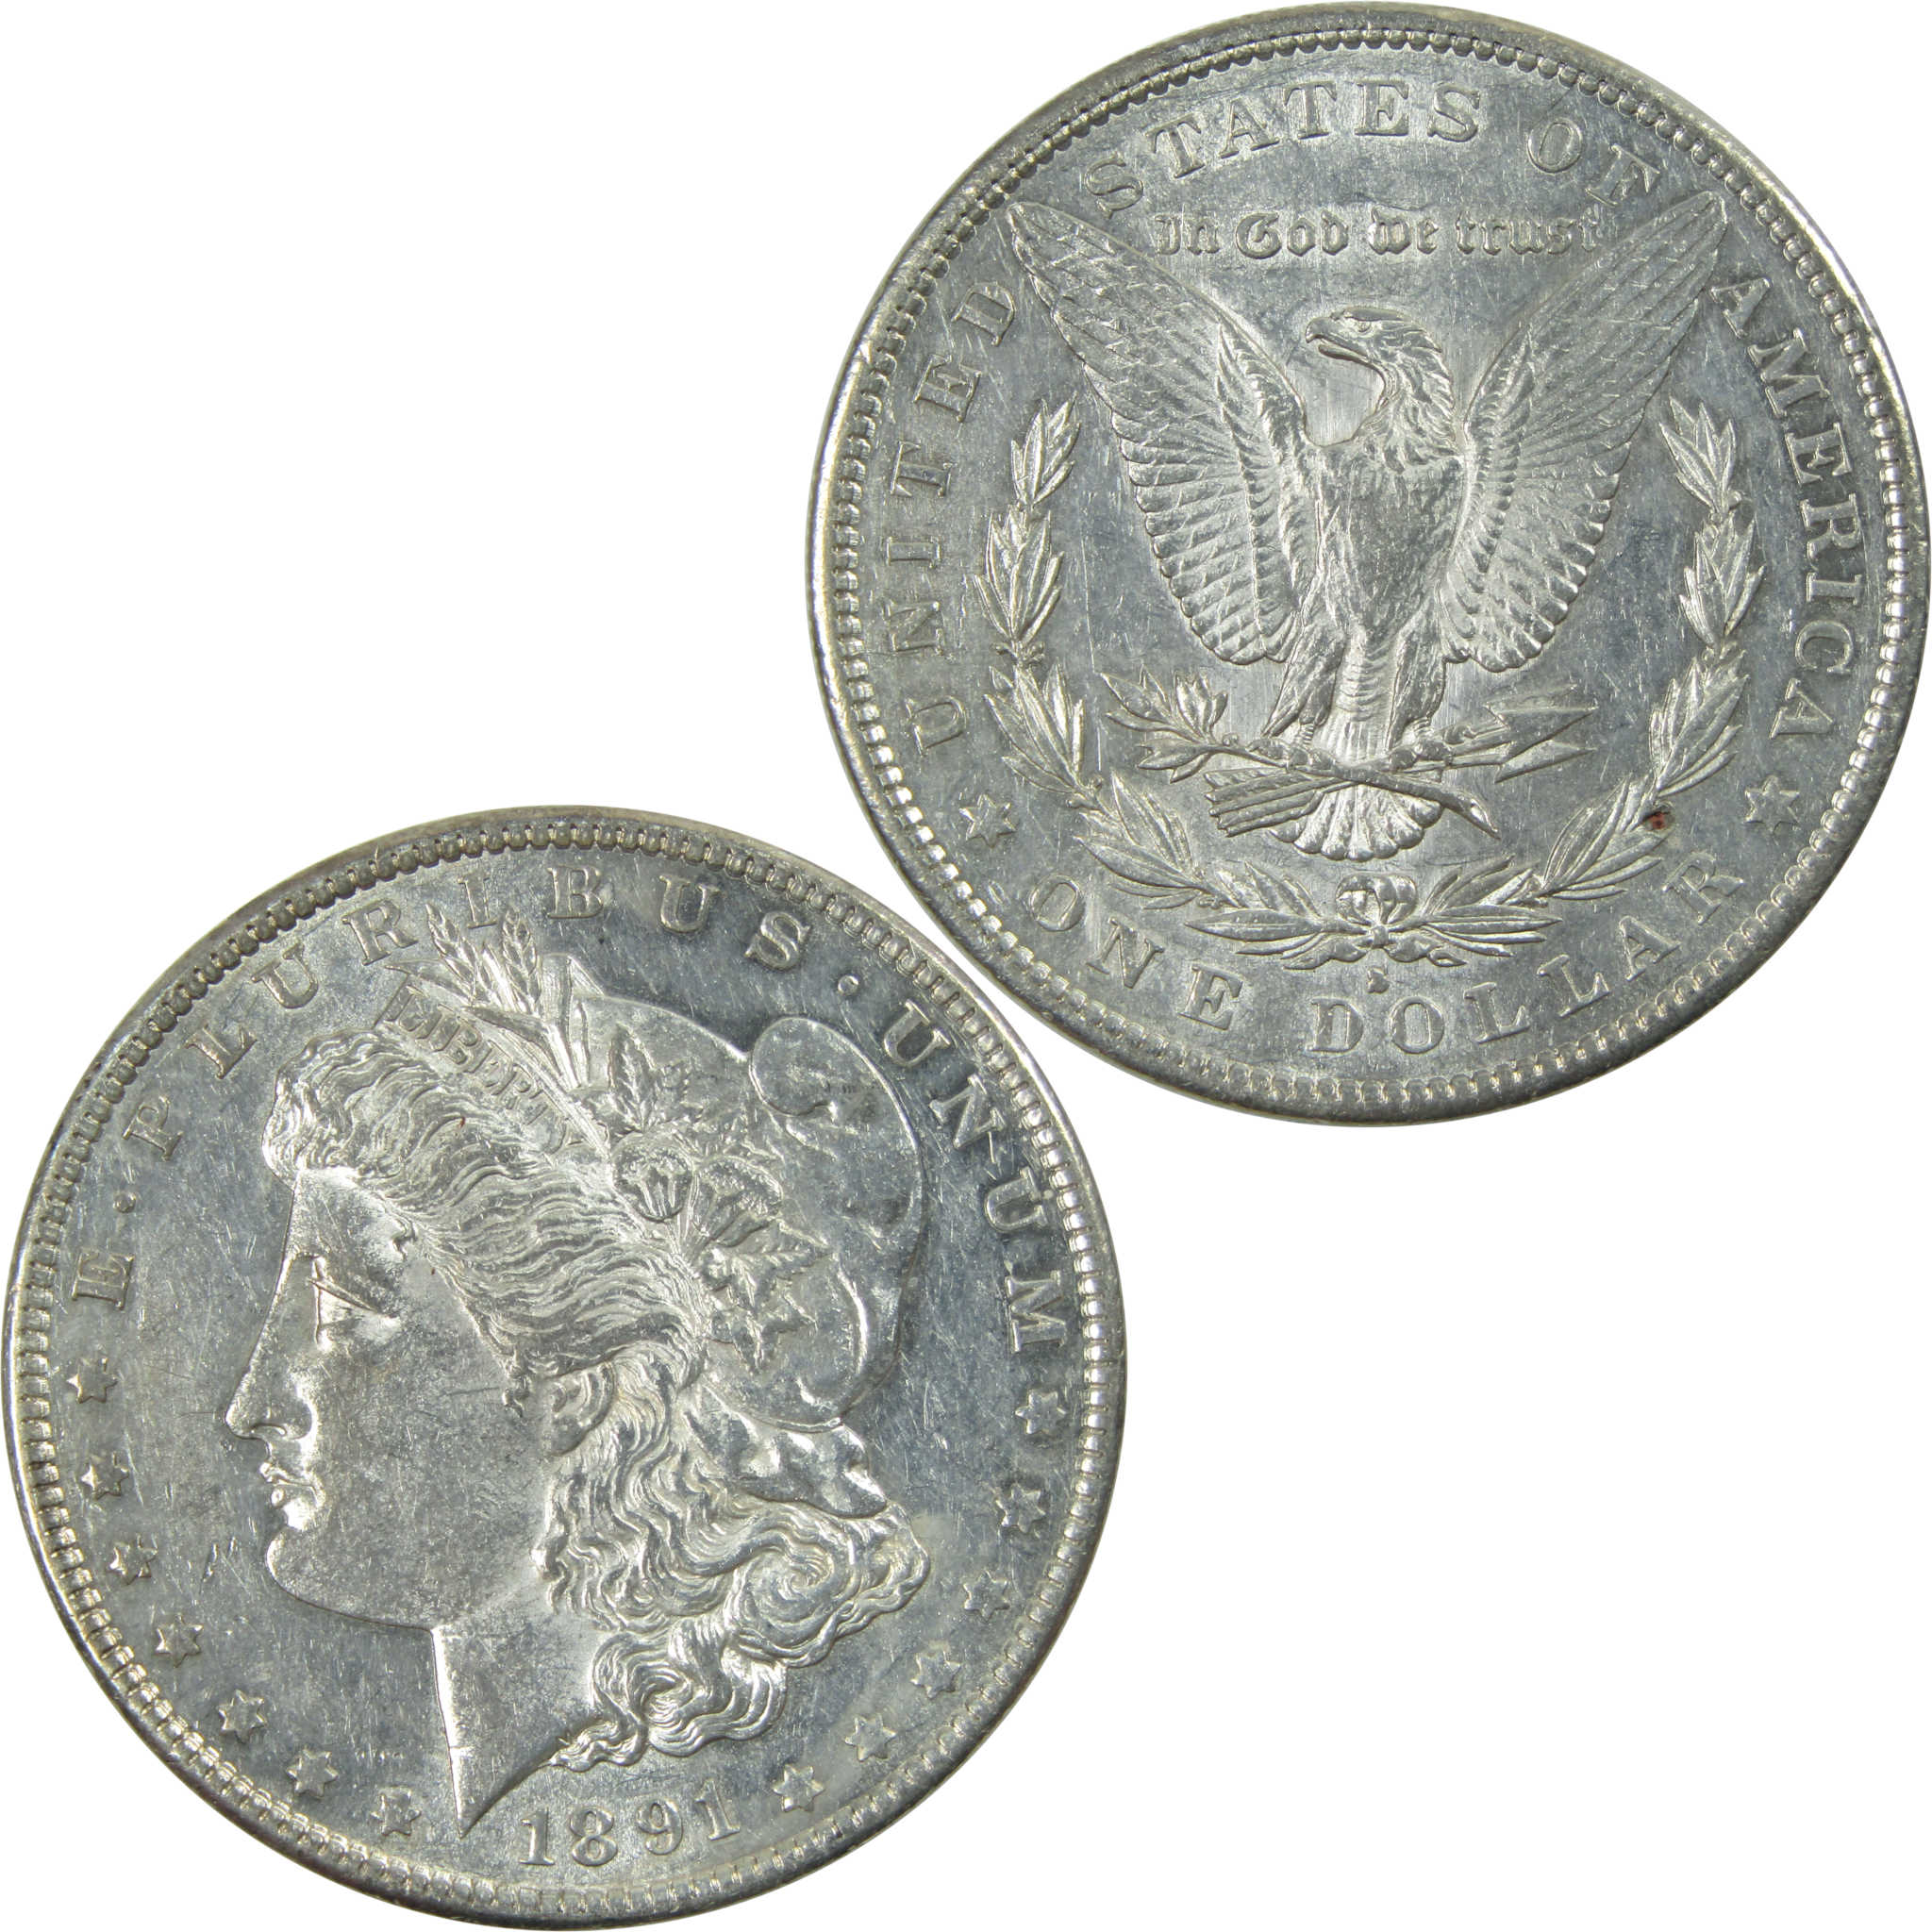 1891 S Morgan Dollar AU About Uncirculated Silver $1 Coin SKU:I13743 - Morgan coin - Morgan silver dollar - Morgan silver dollar for sale - Profile Coins &amp; Collectibles